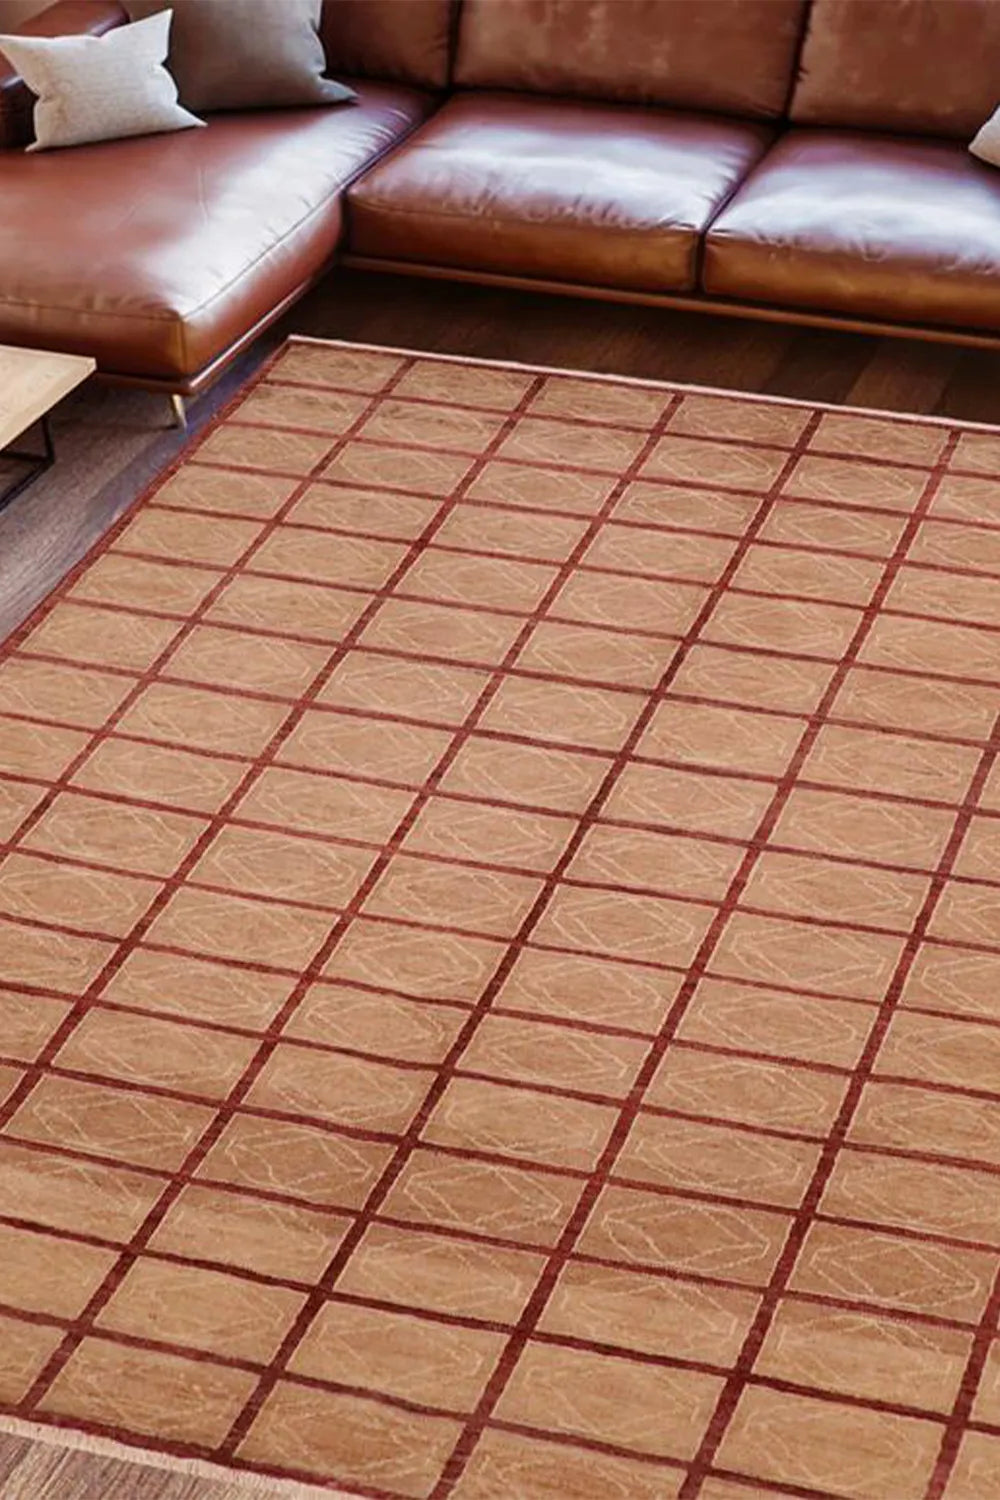 Turkish Wool Rug with Red and Brown Grid, a symbol of artisanal craftsmanship.